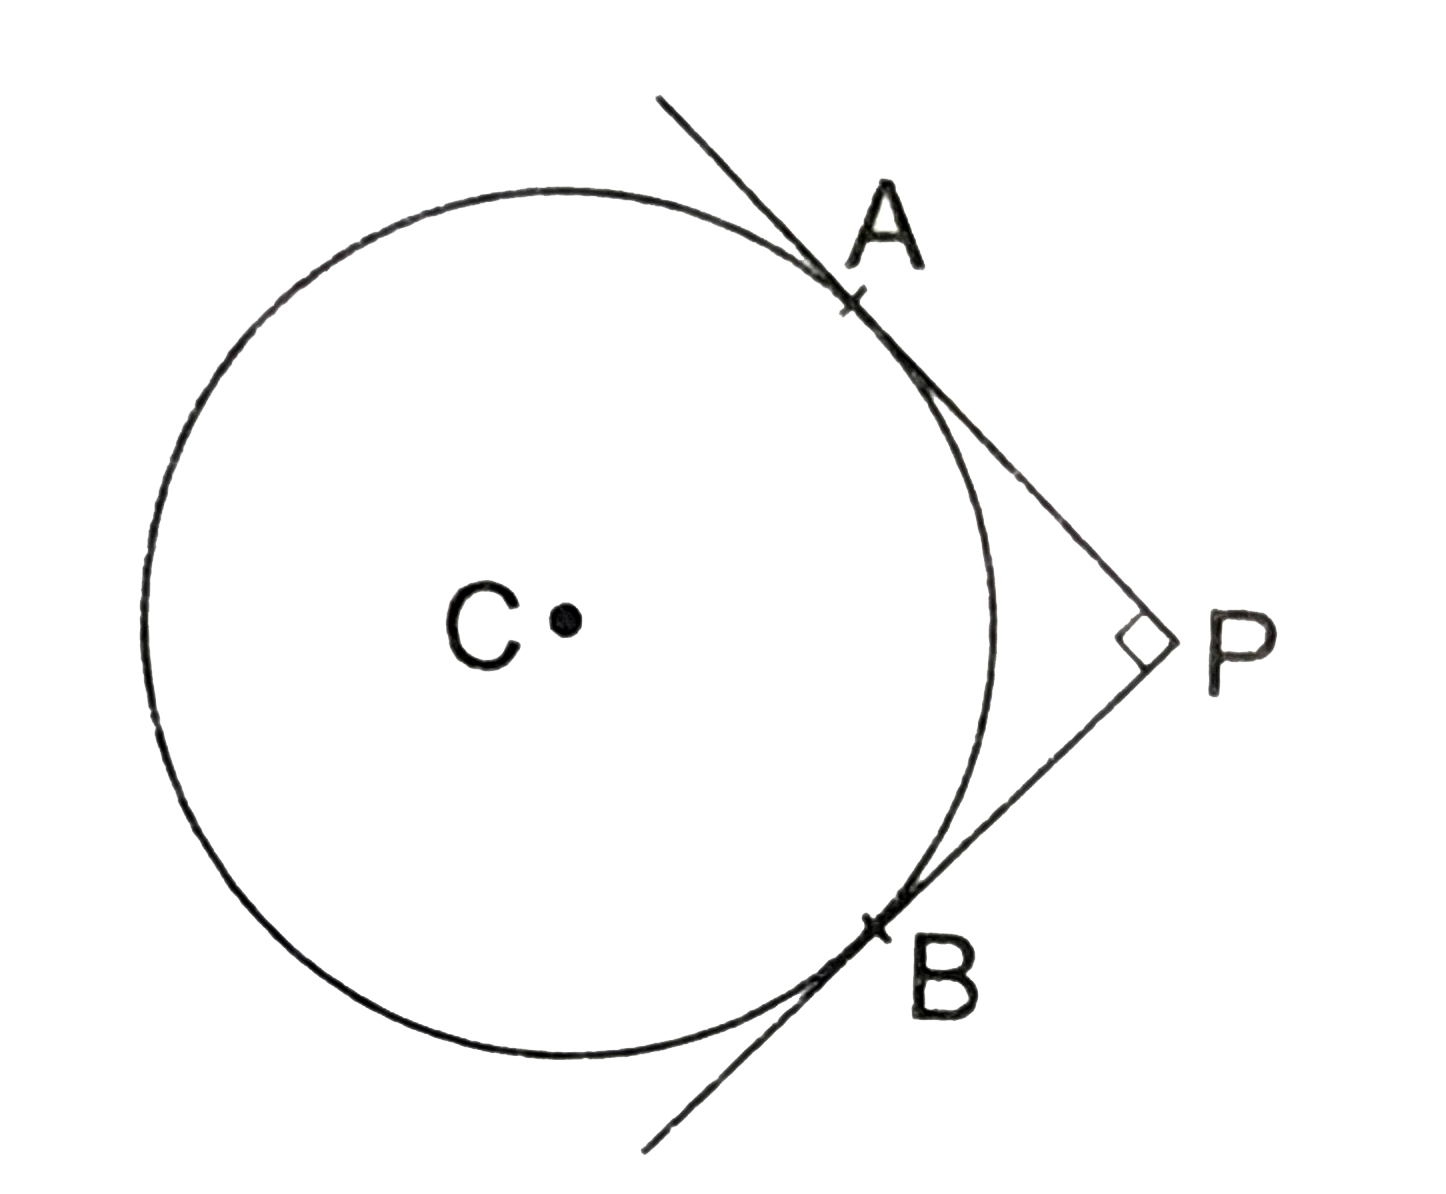 In the given figure, PA and PB are two tangents drawn from an external point P to a circle with centre C and radius 4cm. If PAbotPB, then the length of each tangent is